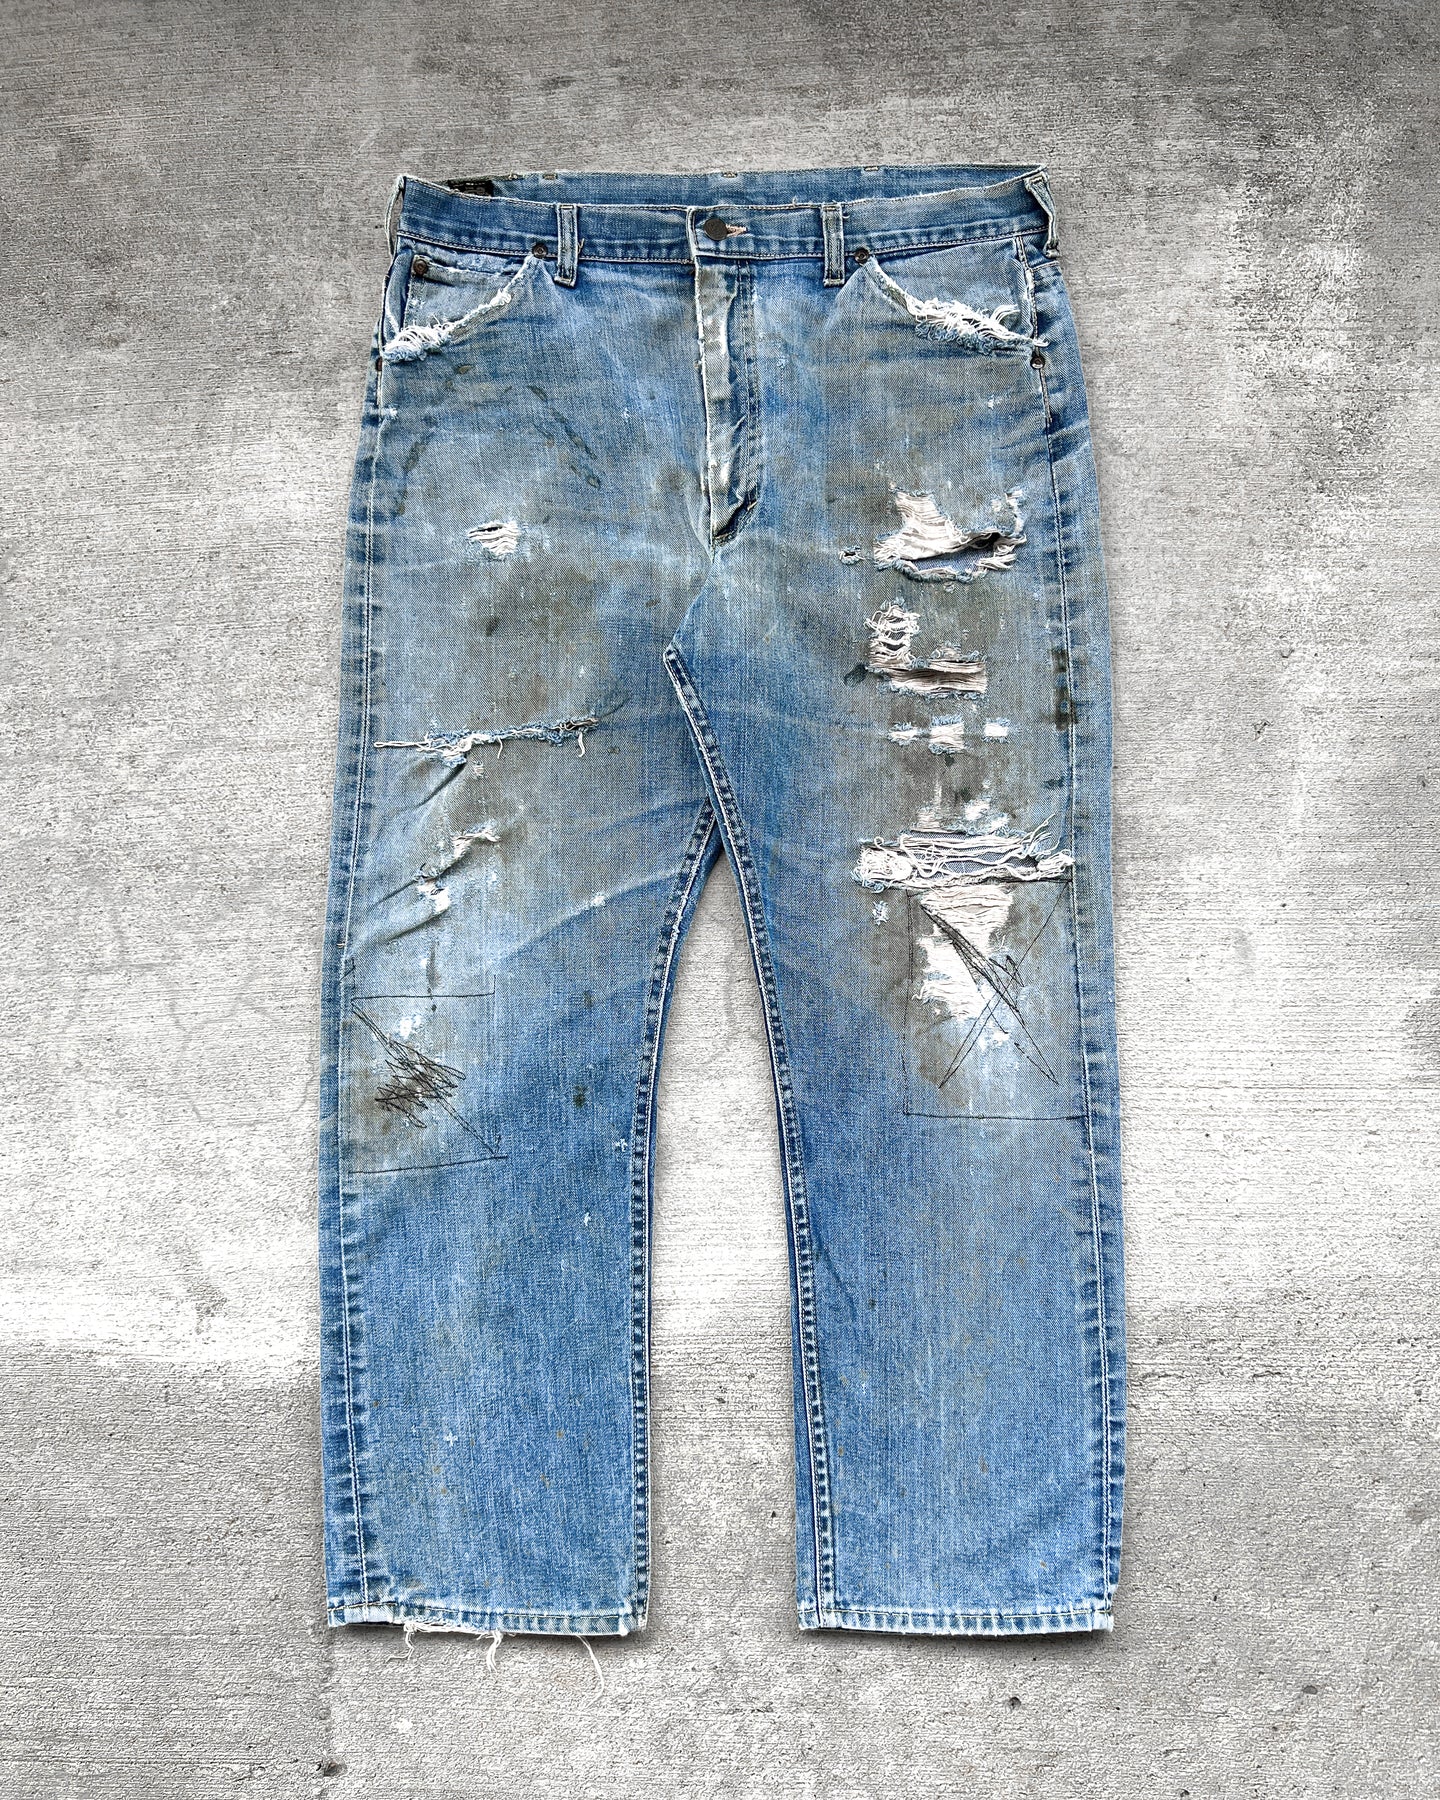 1960s Thrashed and Repaired Lee Rider Jeans - Size 36 x 29